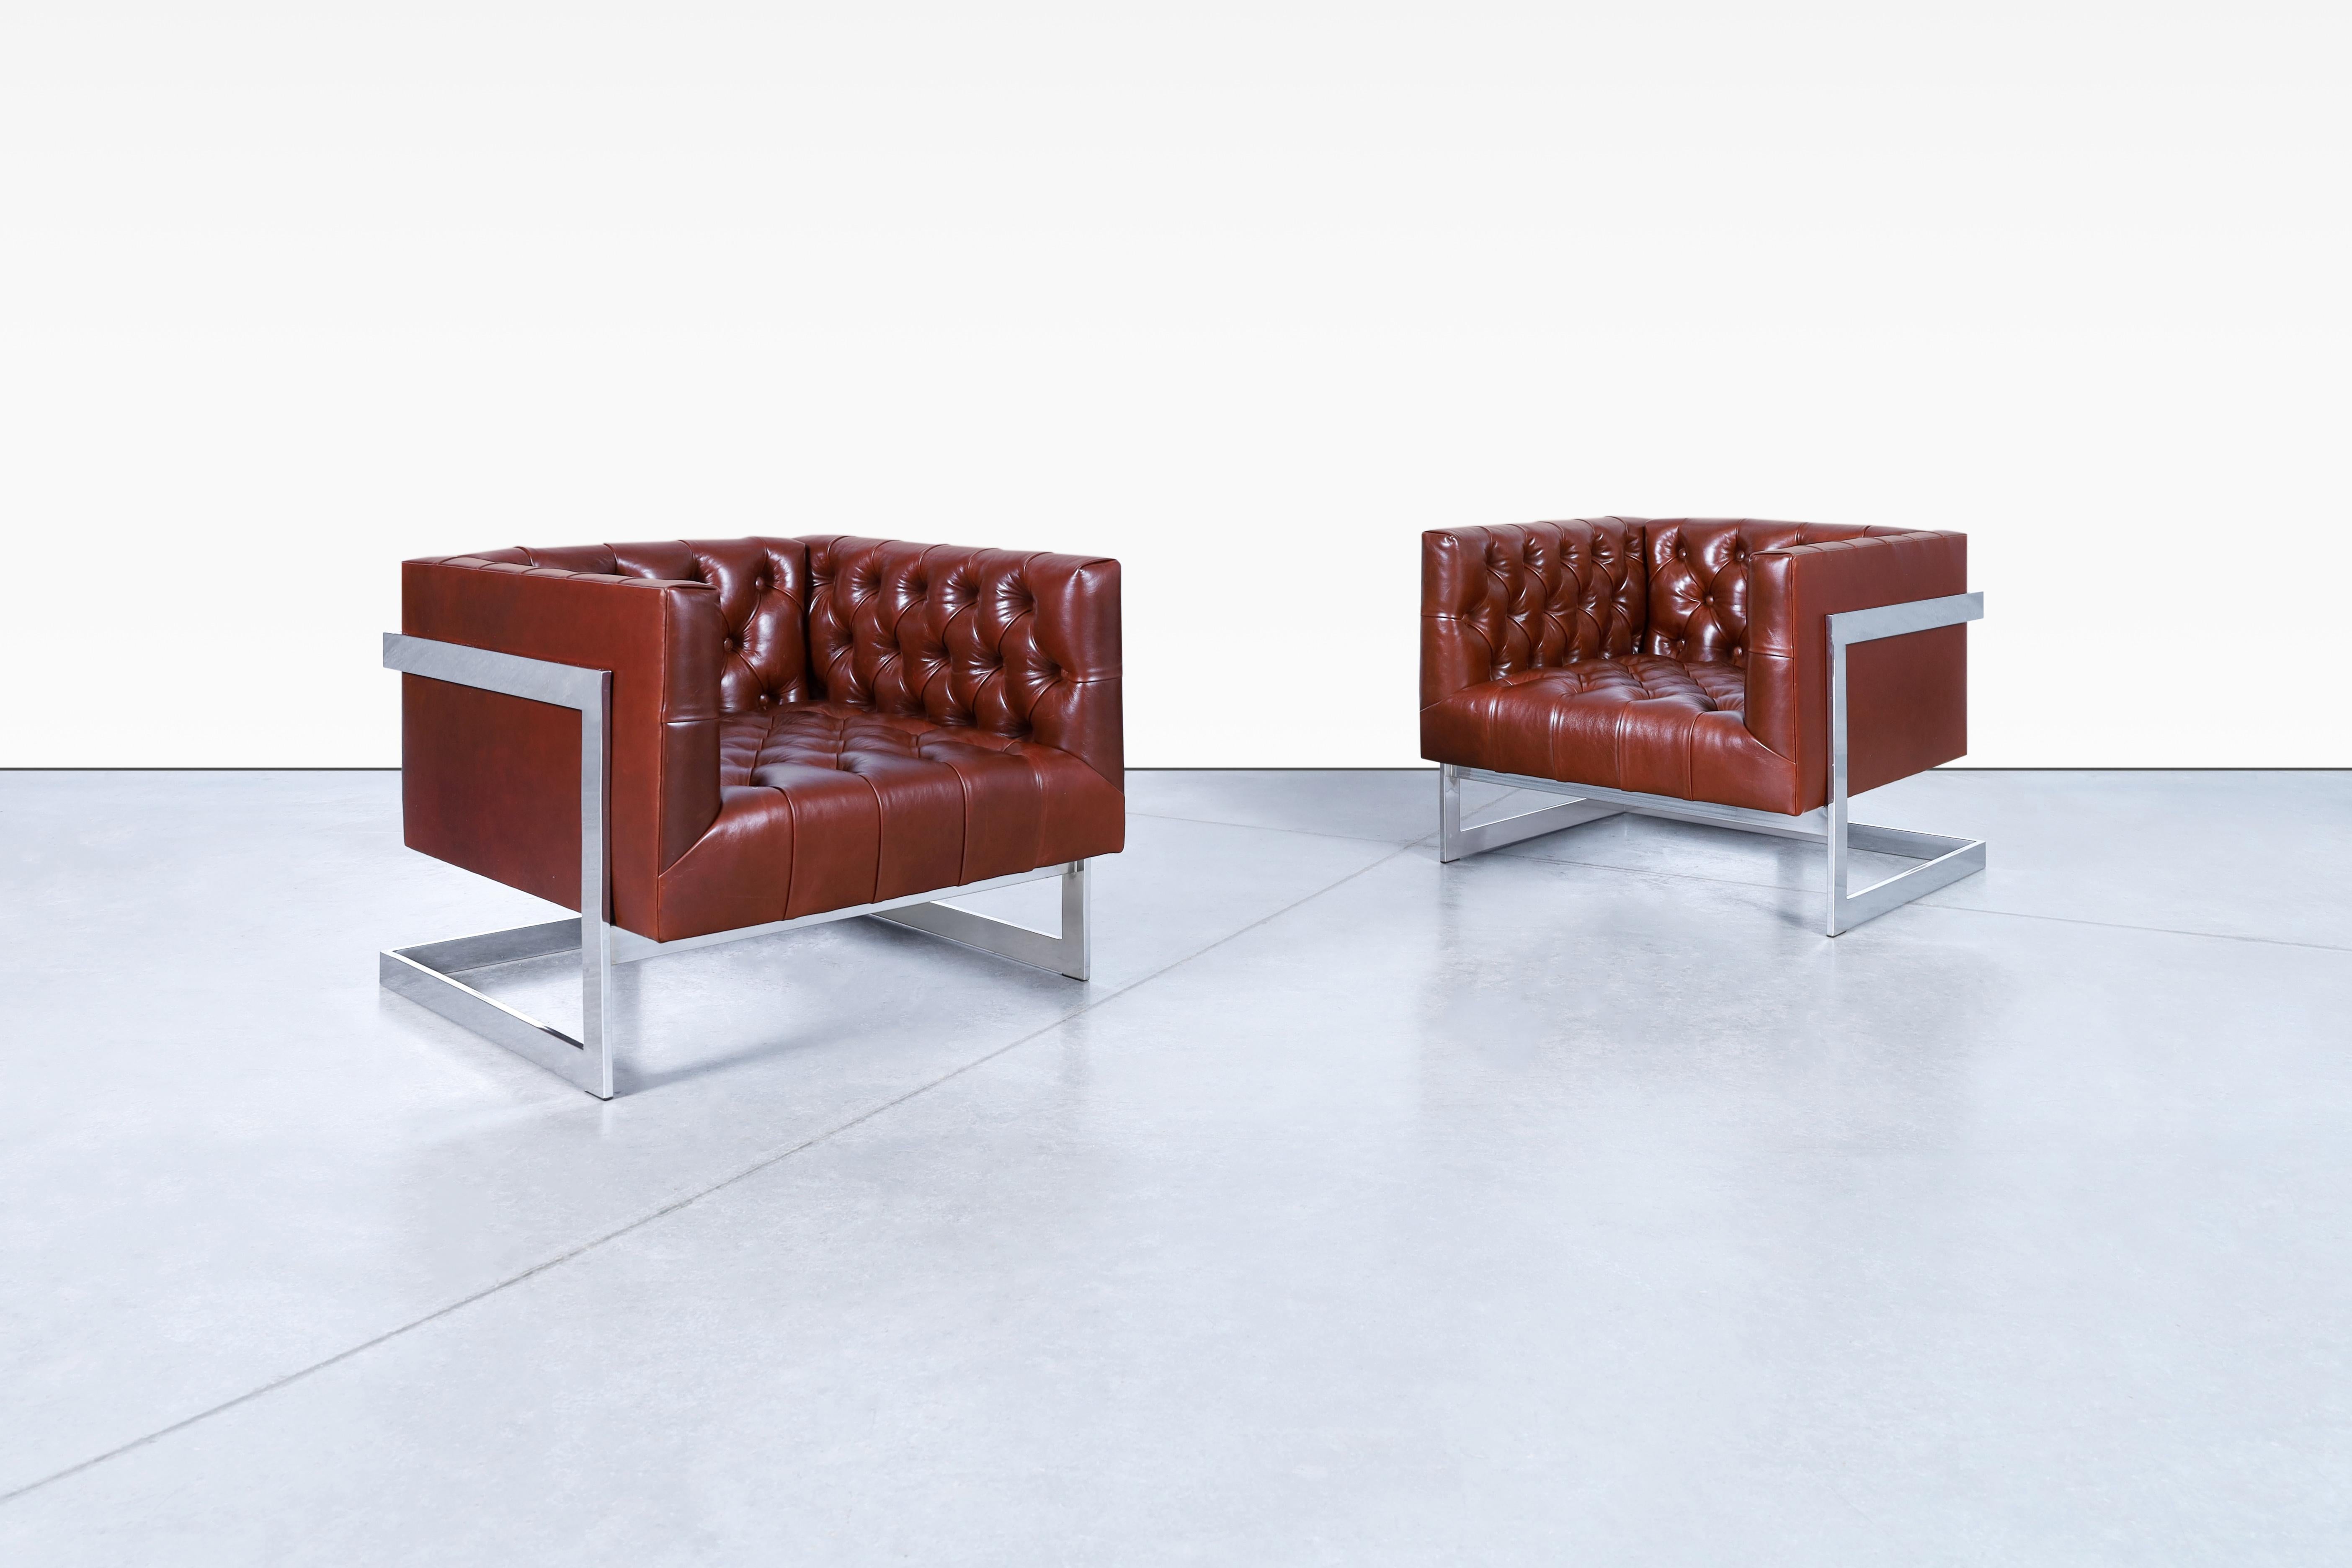 Amazing vintage leather and chrome lounge chairs designed by Milo Baughman for Thayer Coggin in the United States, circa 1960s. The appeal of these chairs is simply breathtaking. Their sleek chrome frames create a mesmerizing illusion of